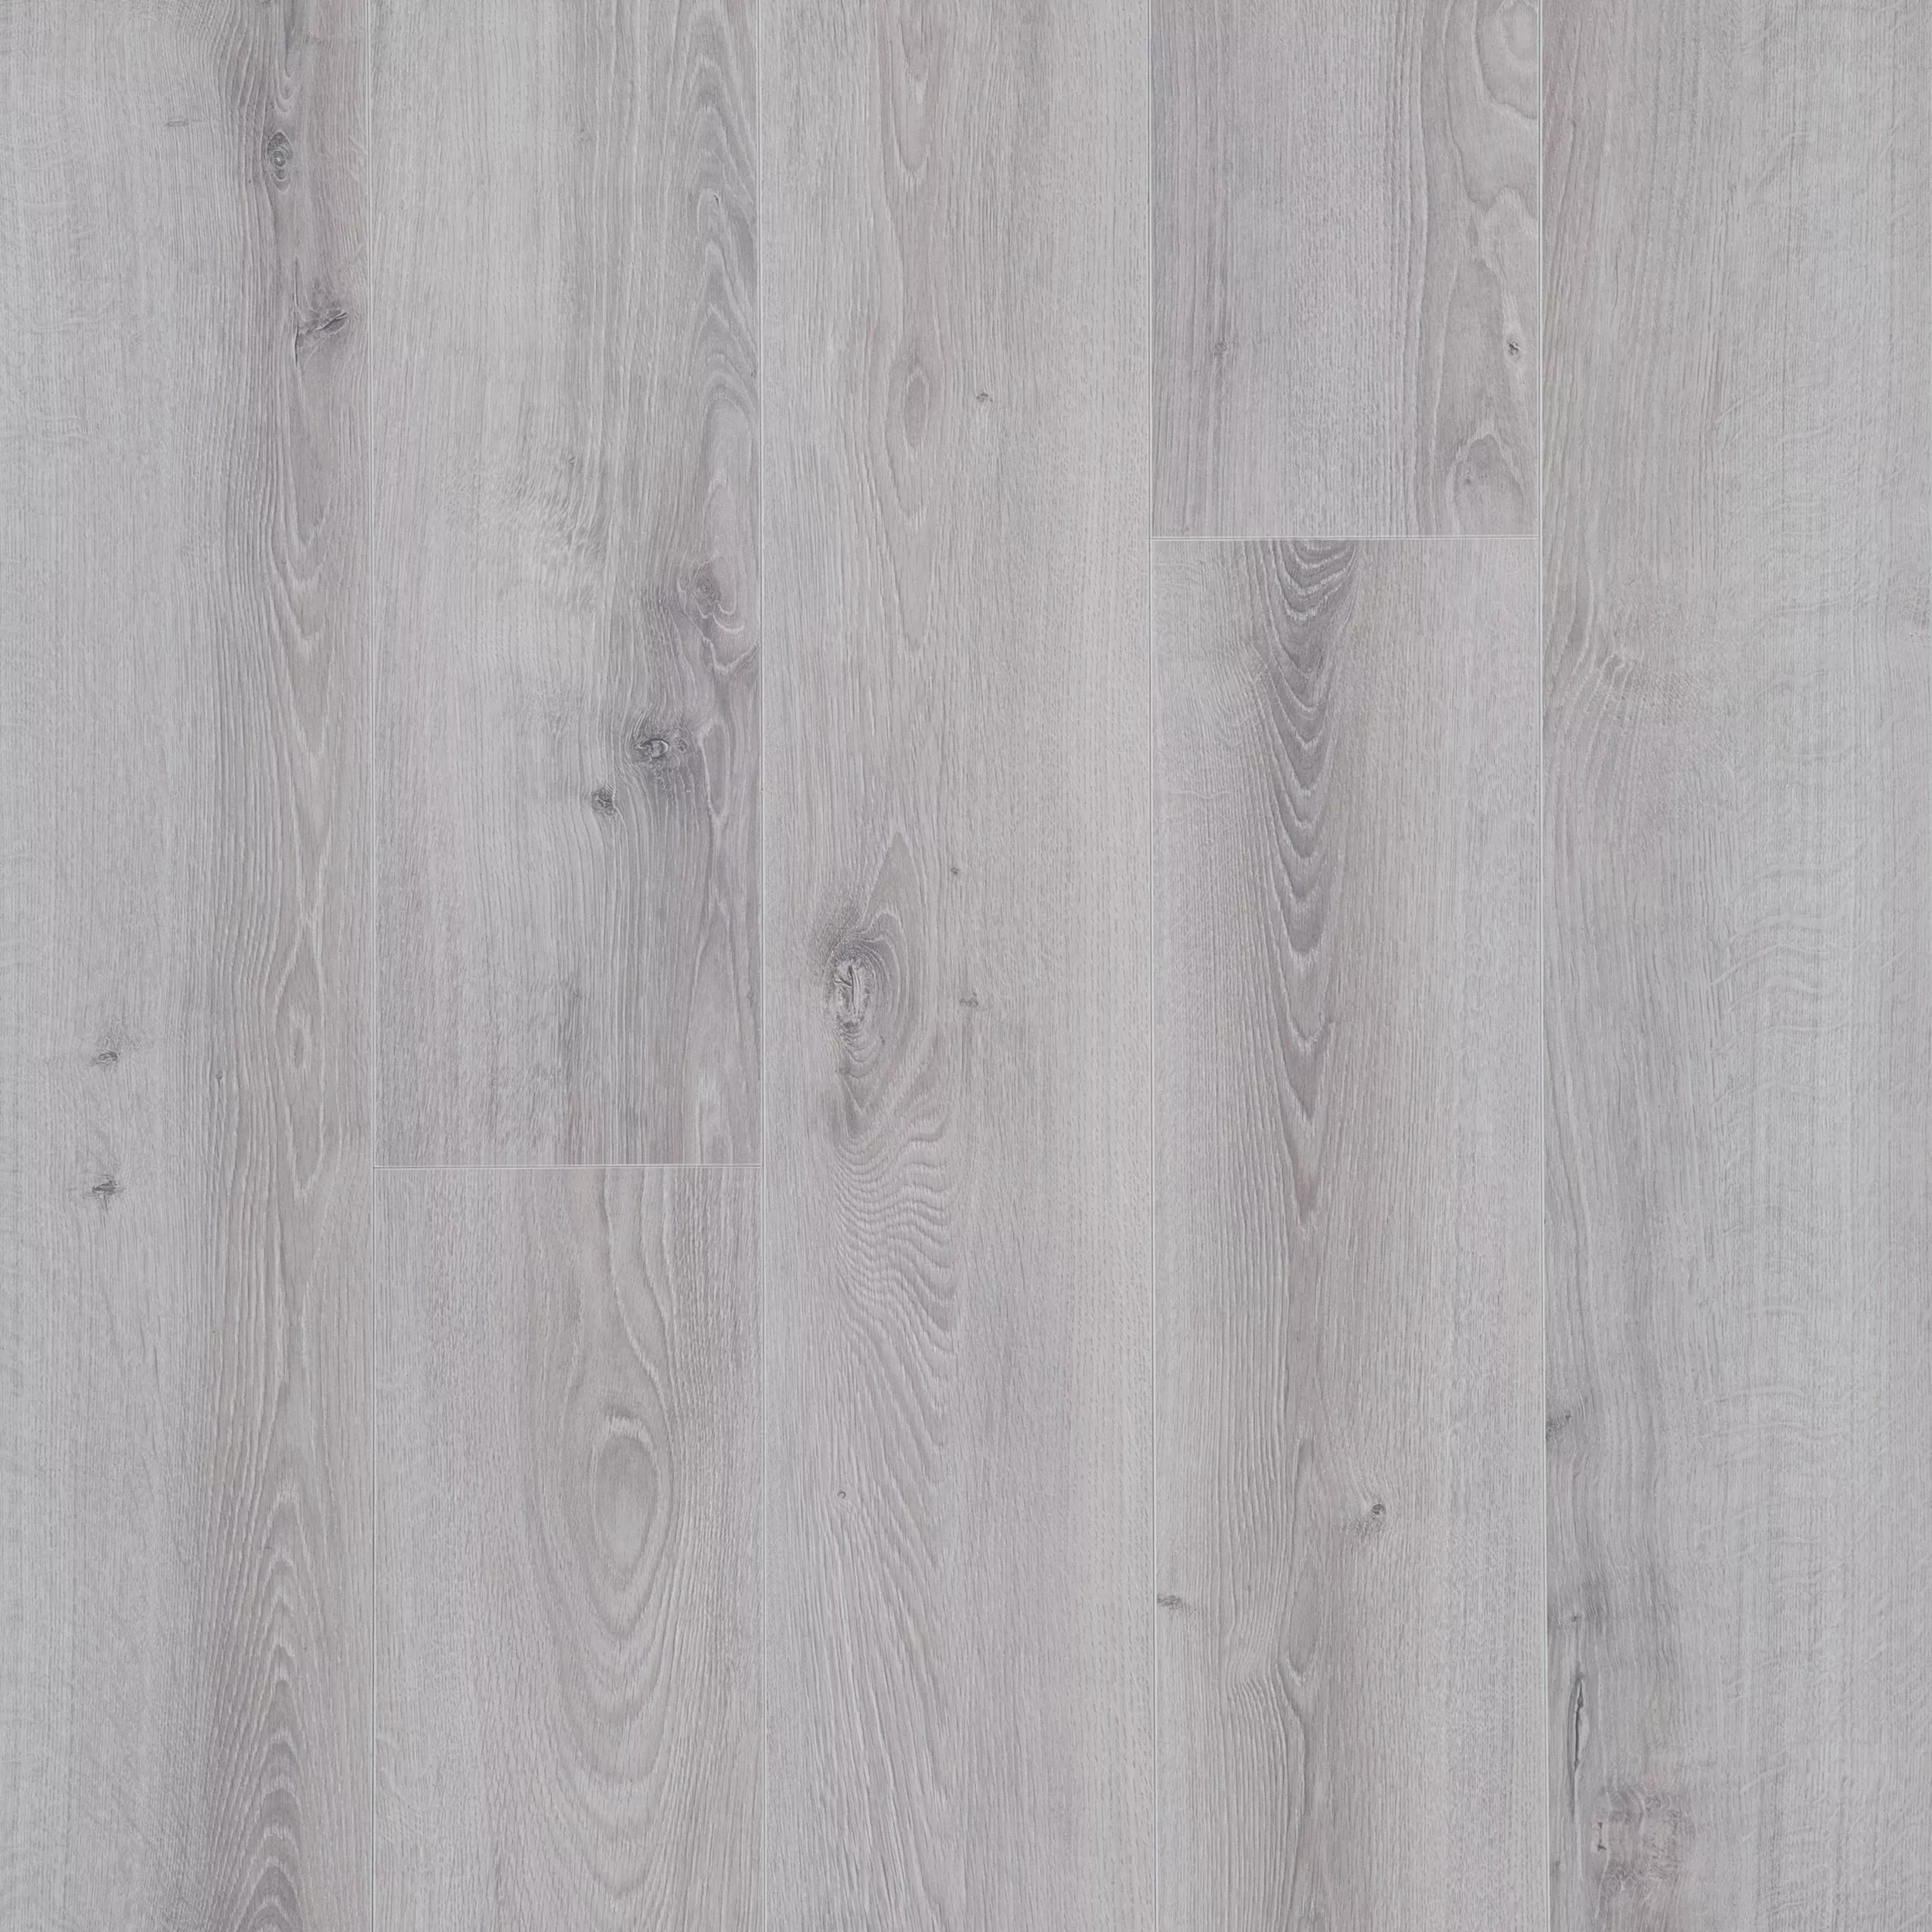 East Bay Breeze Laminate | Floor and Decor